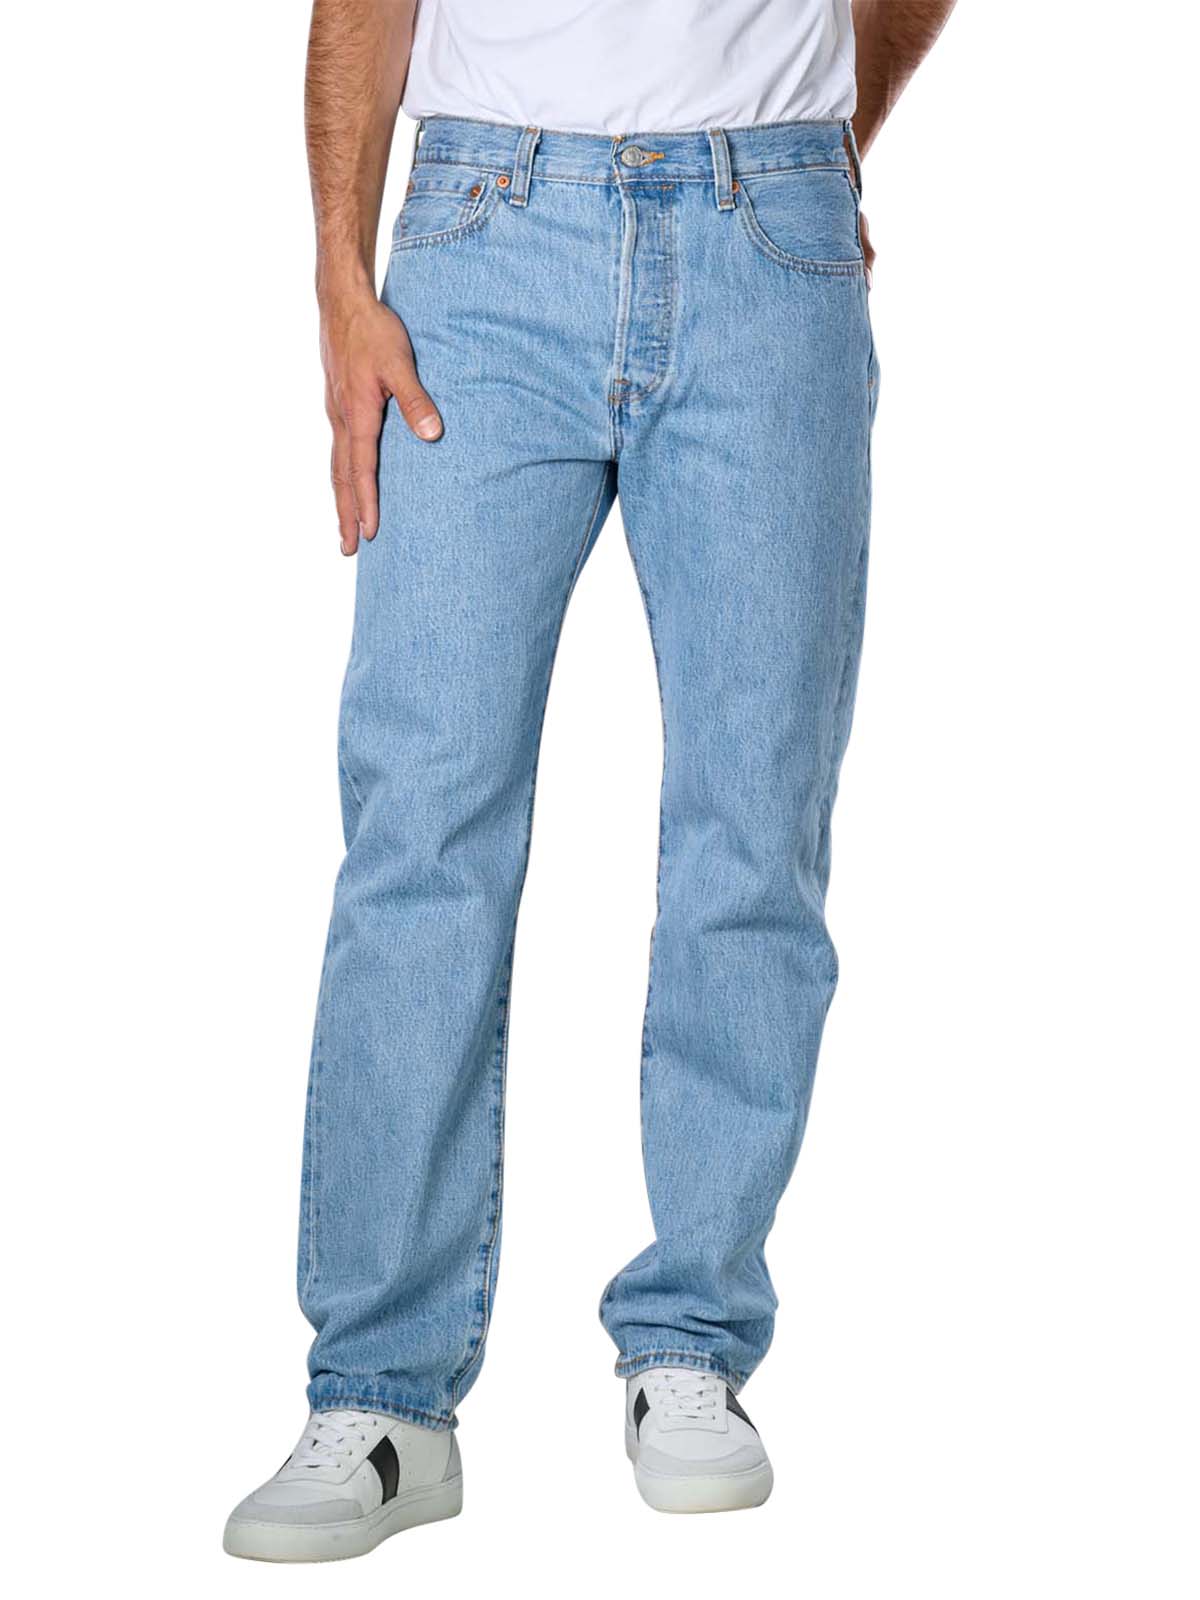 Levi's 501 Jeans light stonewash Levi's Men's Jeans | Free Shipping on   - SIMPLY LOOK GOOD